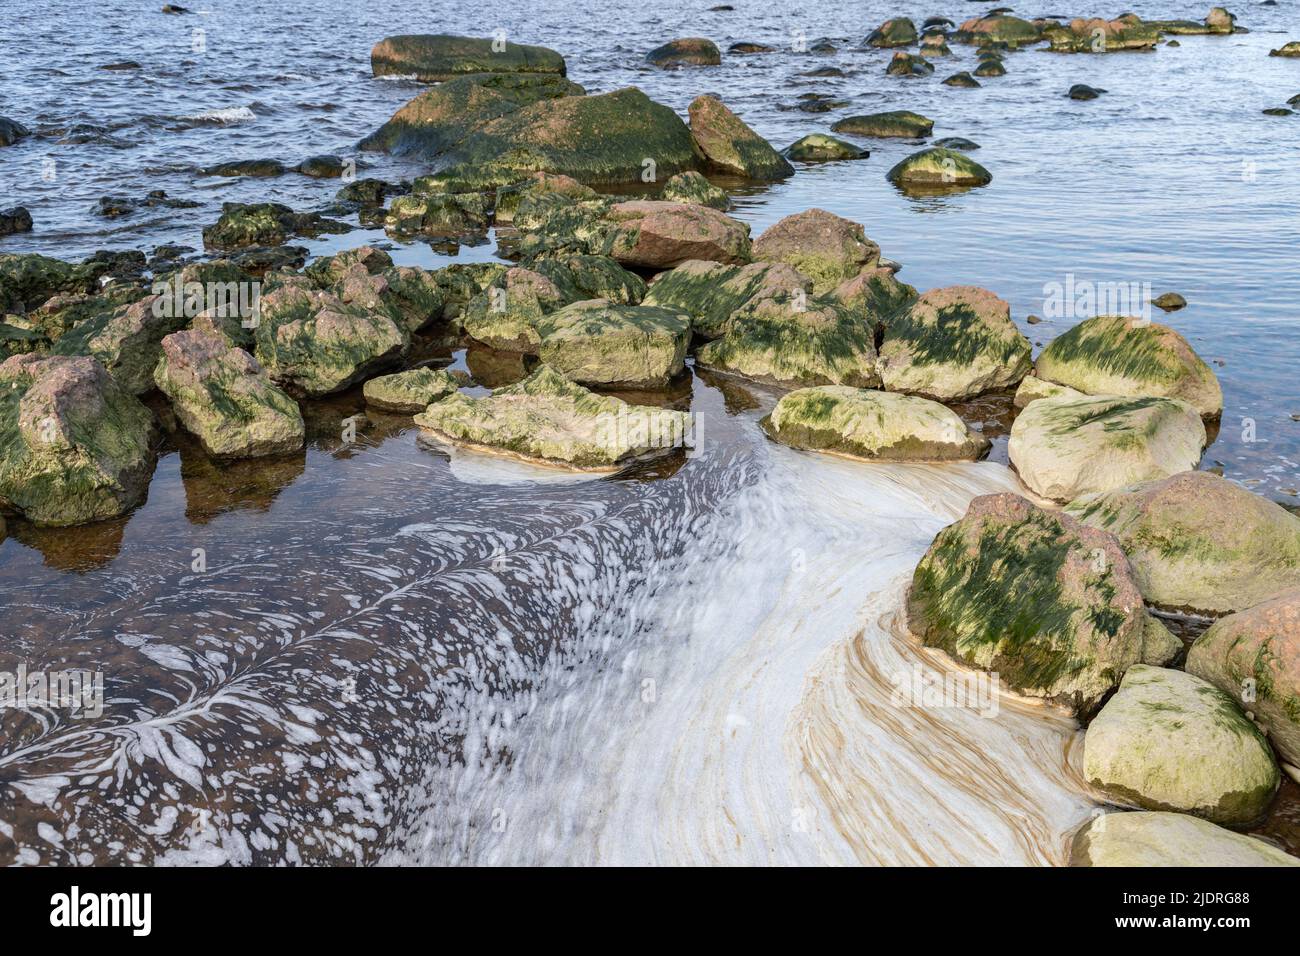 Wet granite stones with algae lay in a shallow water of Baltic Sea, coast of the Gulf of Finland, Russia Stock Photo